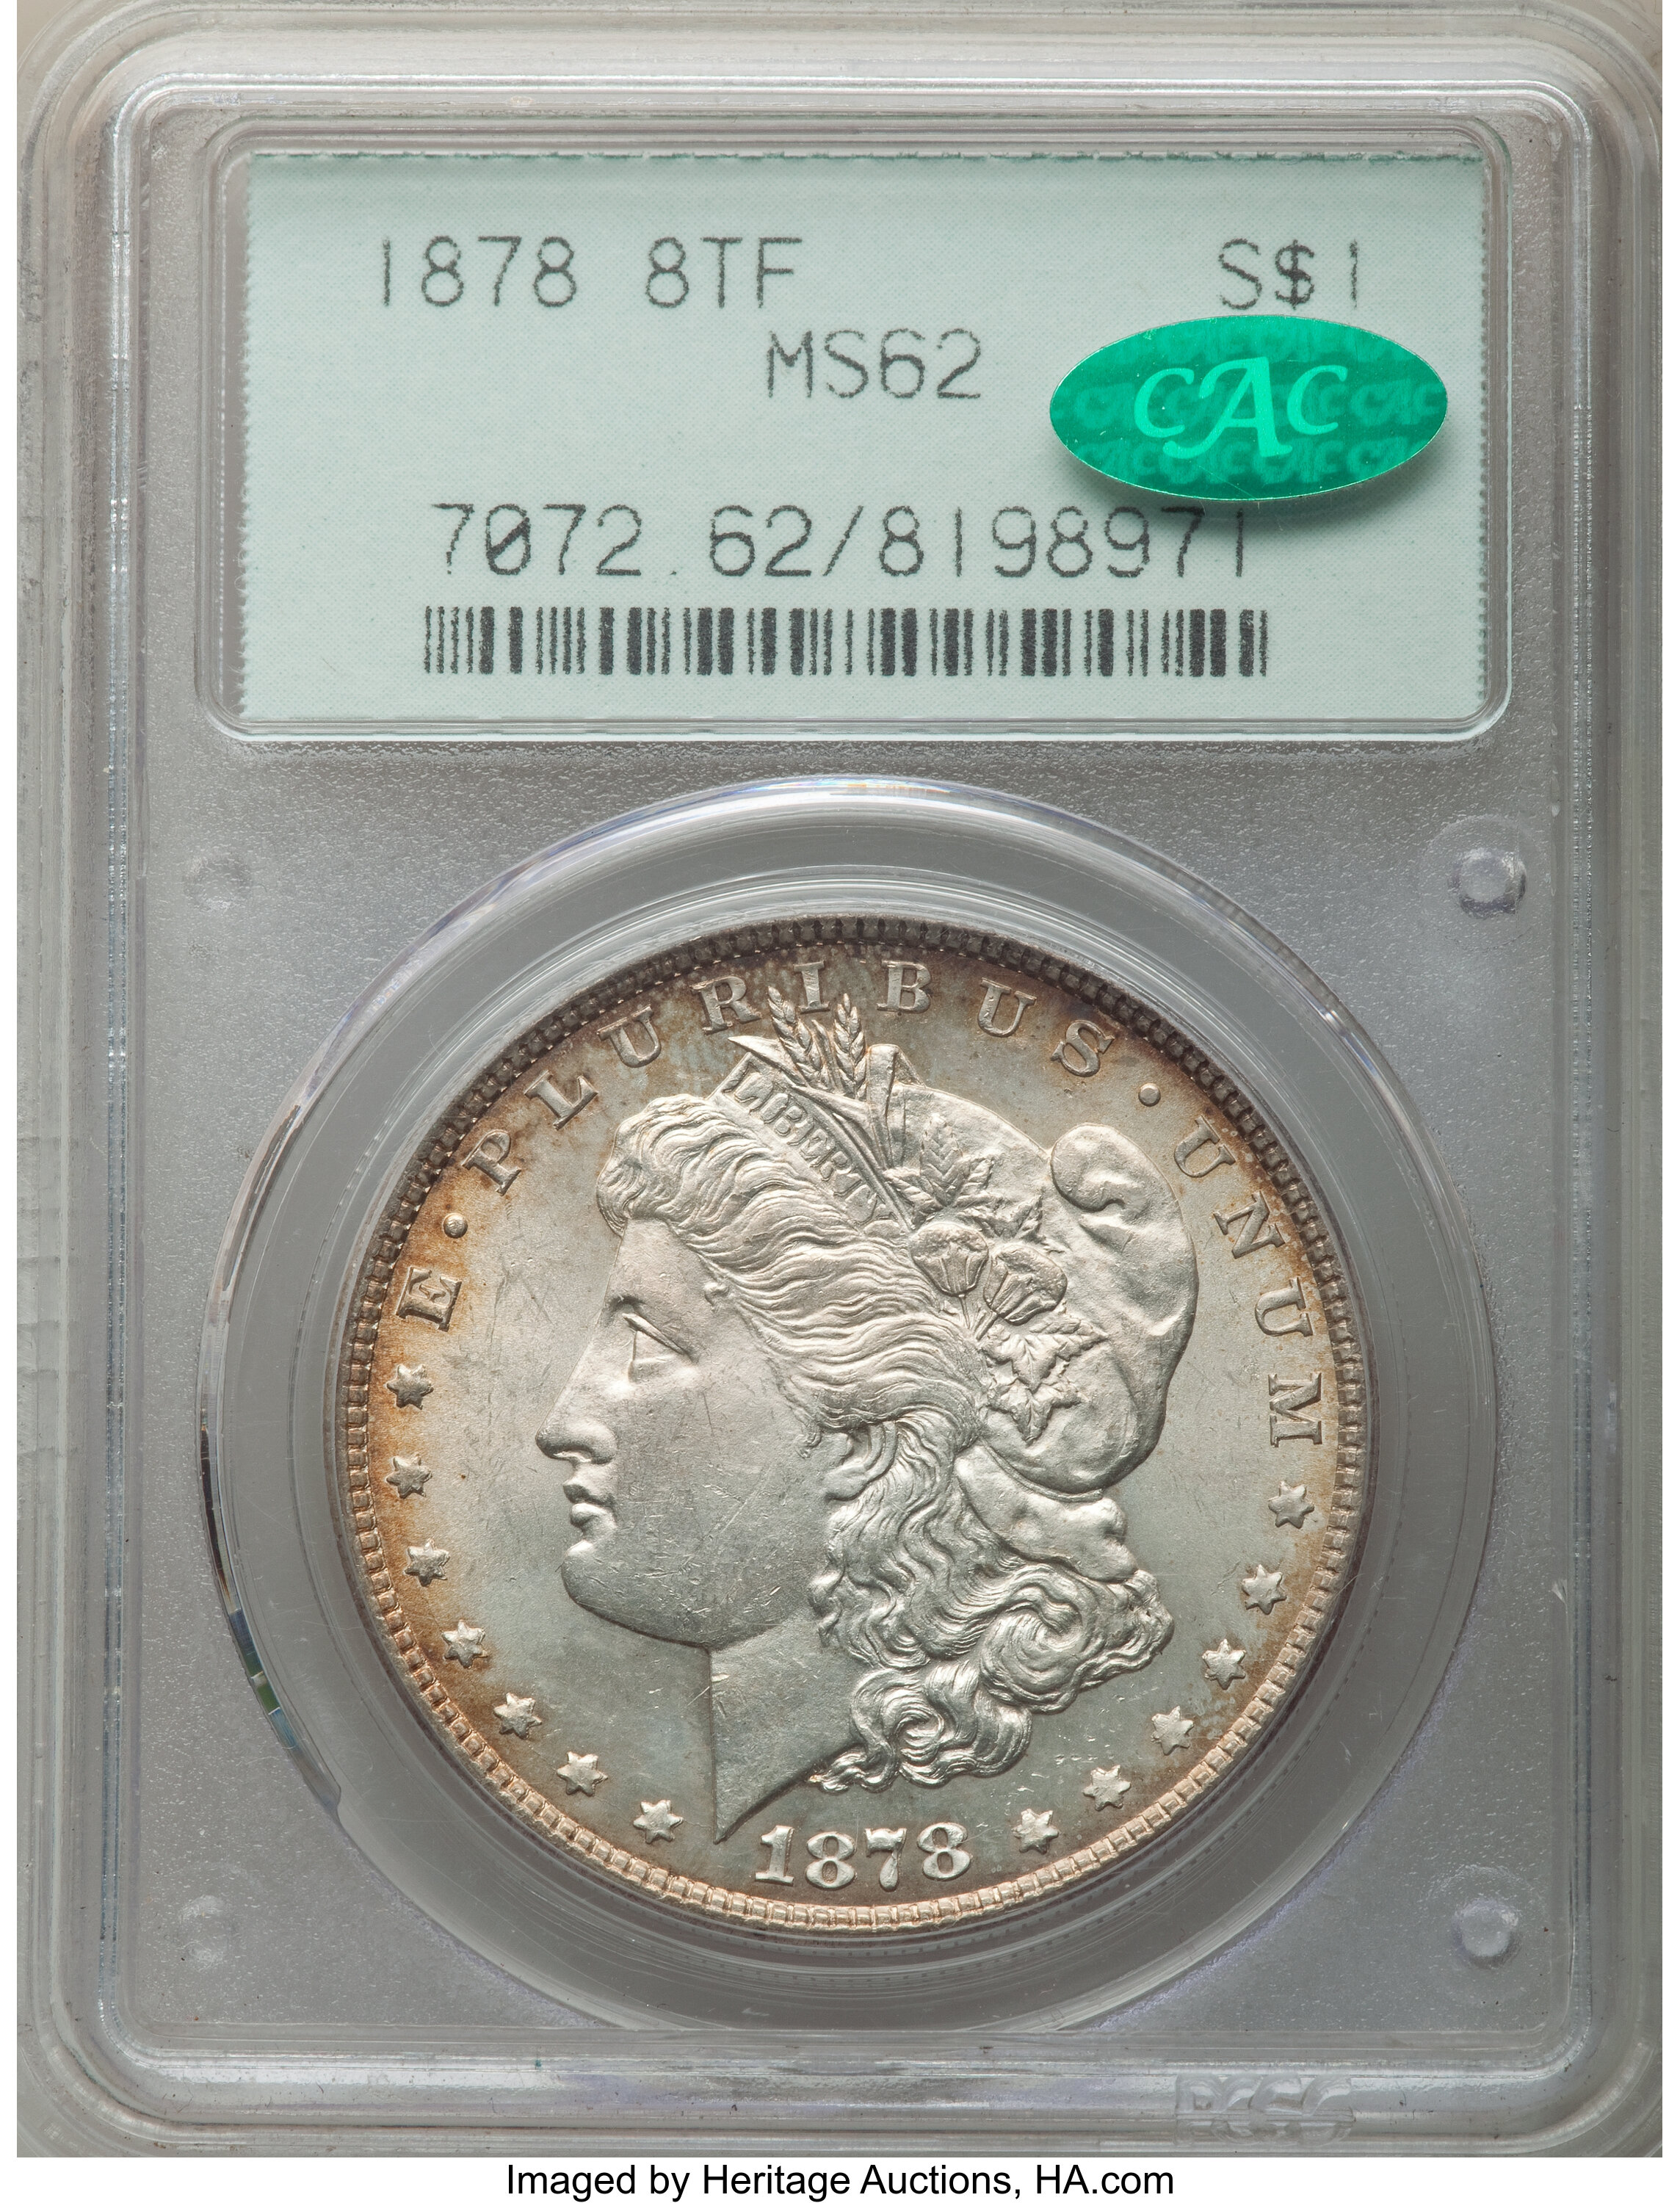 1878 8TF $1 MS62 PCGS. CAC. Housed in an old vintage Gen. 2.1A | Lot